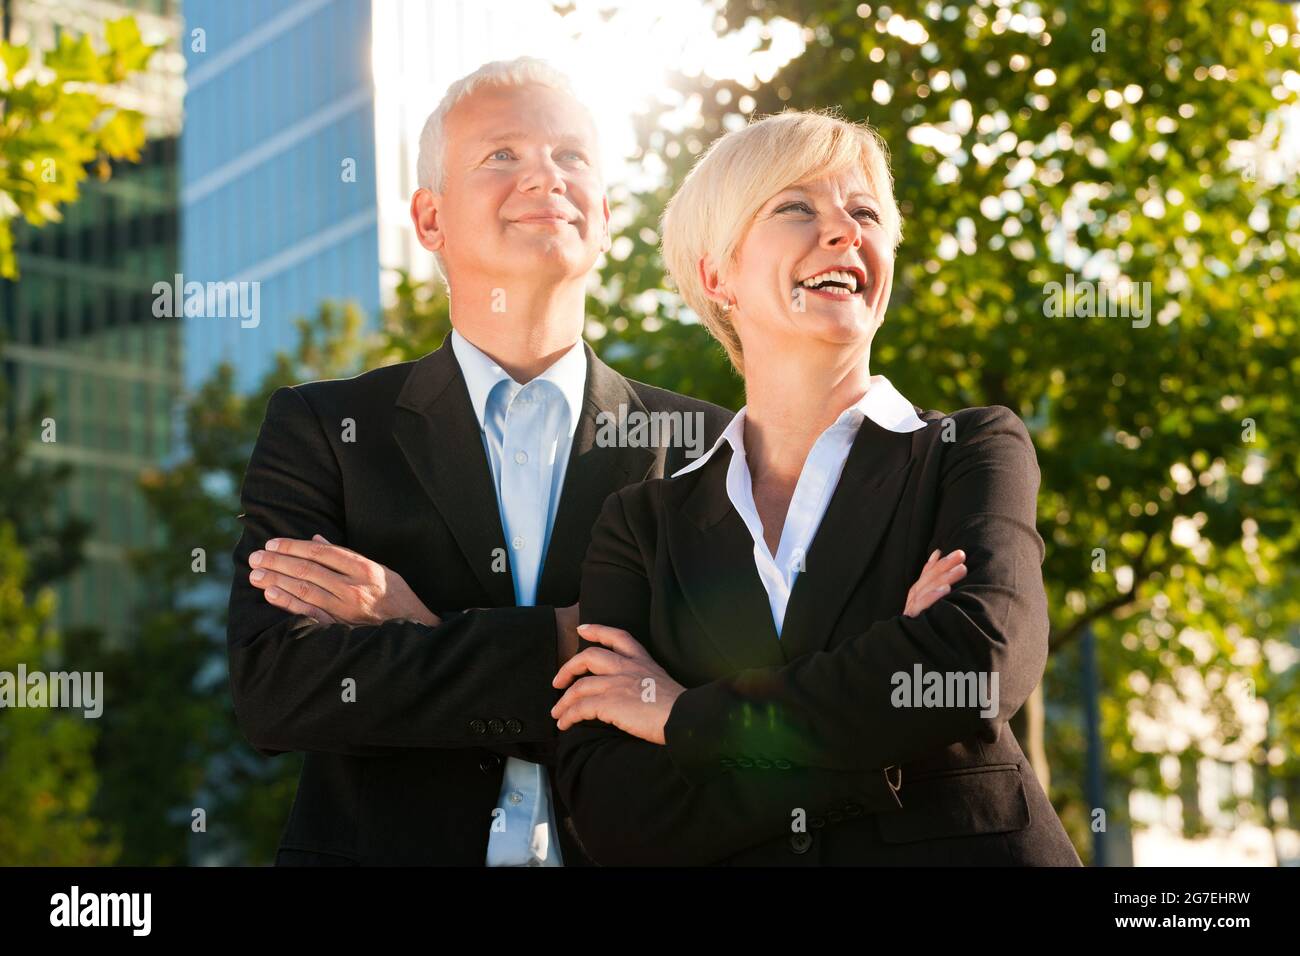 Business people - mature or senior - standing in a park outdoors in front of a office building Stock Photo